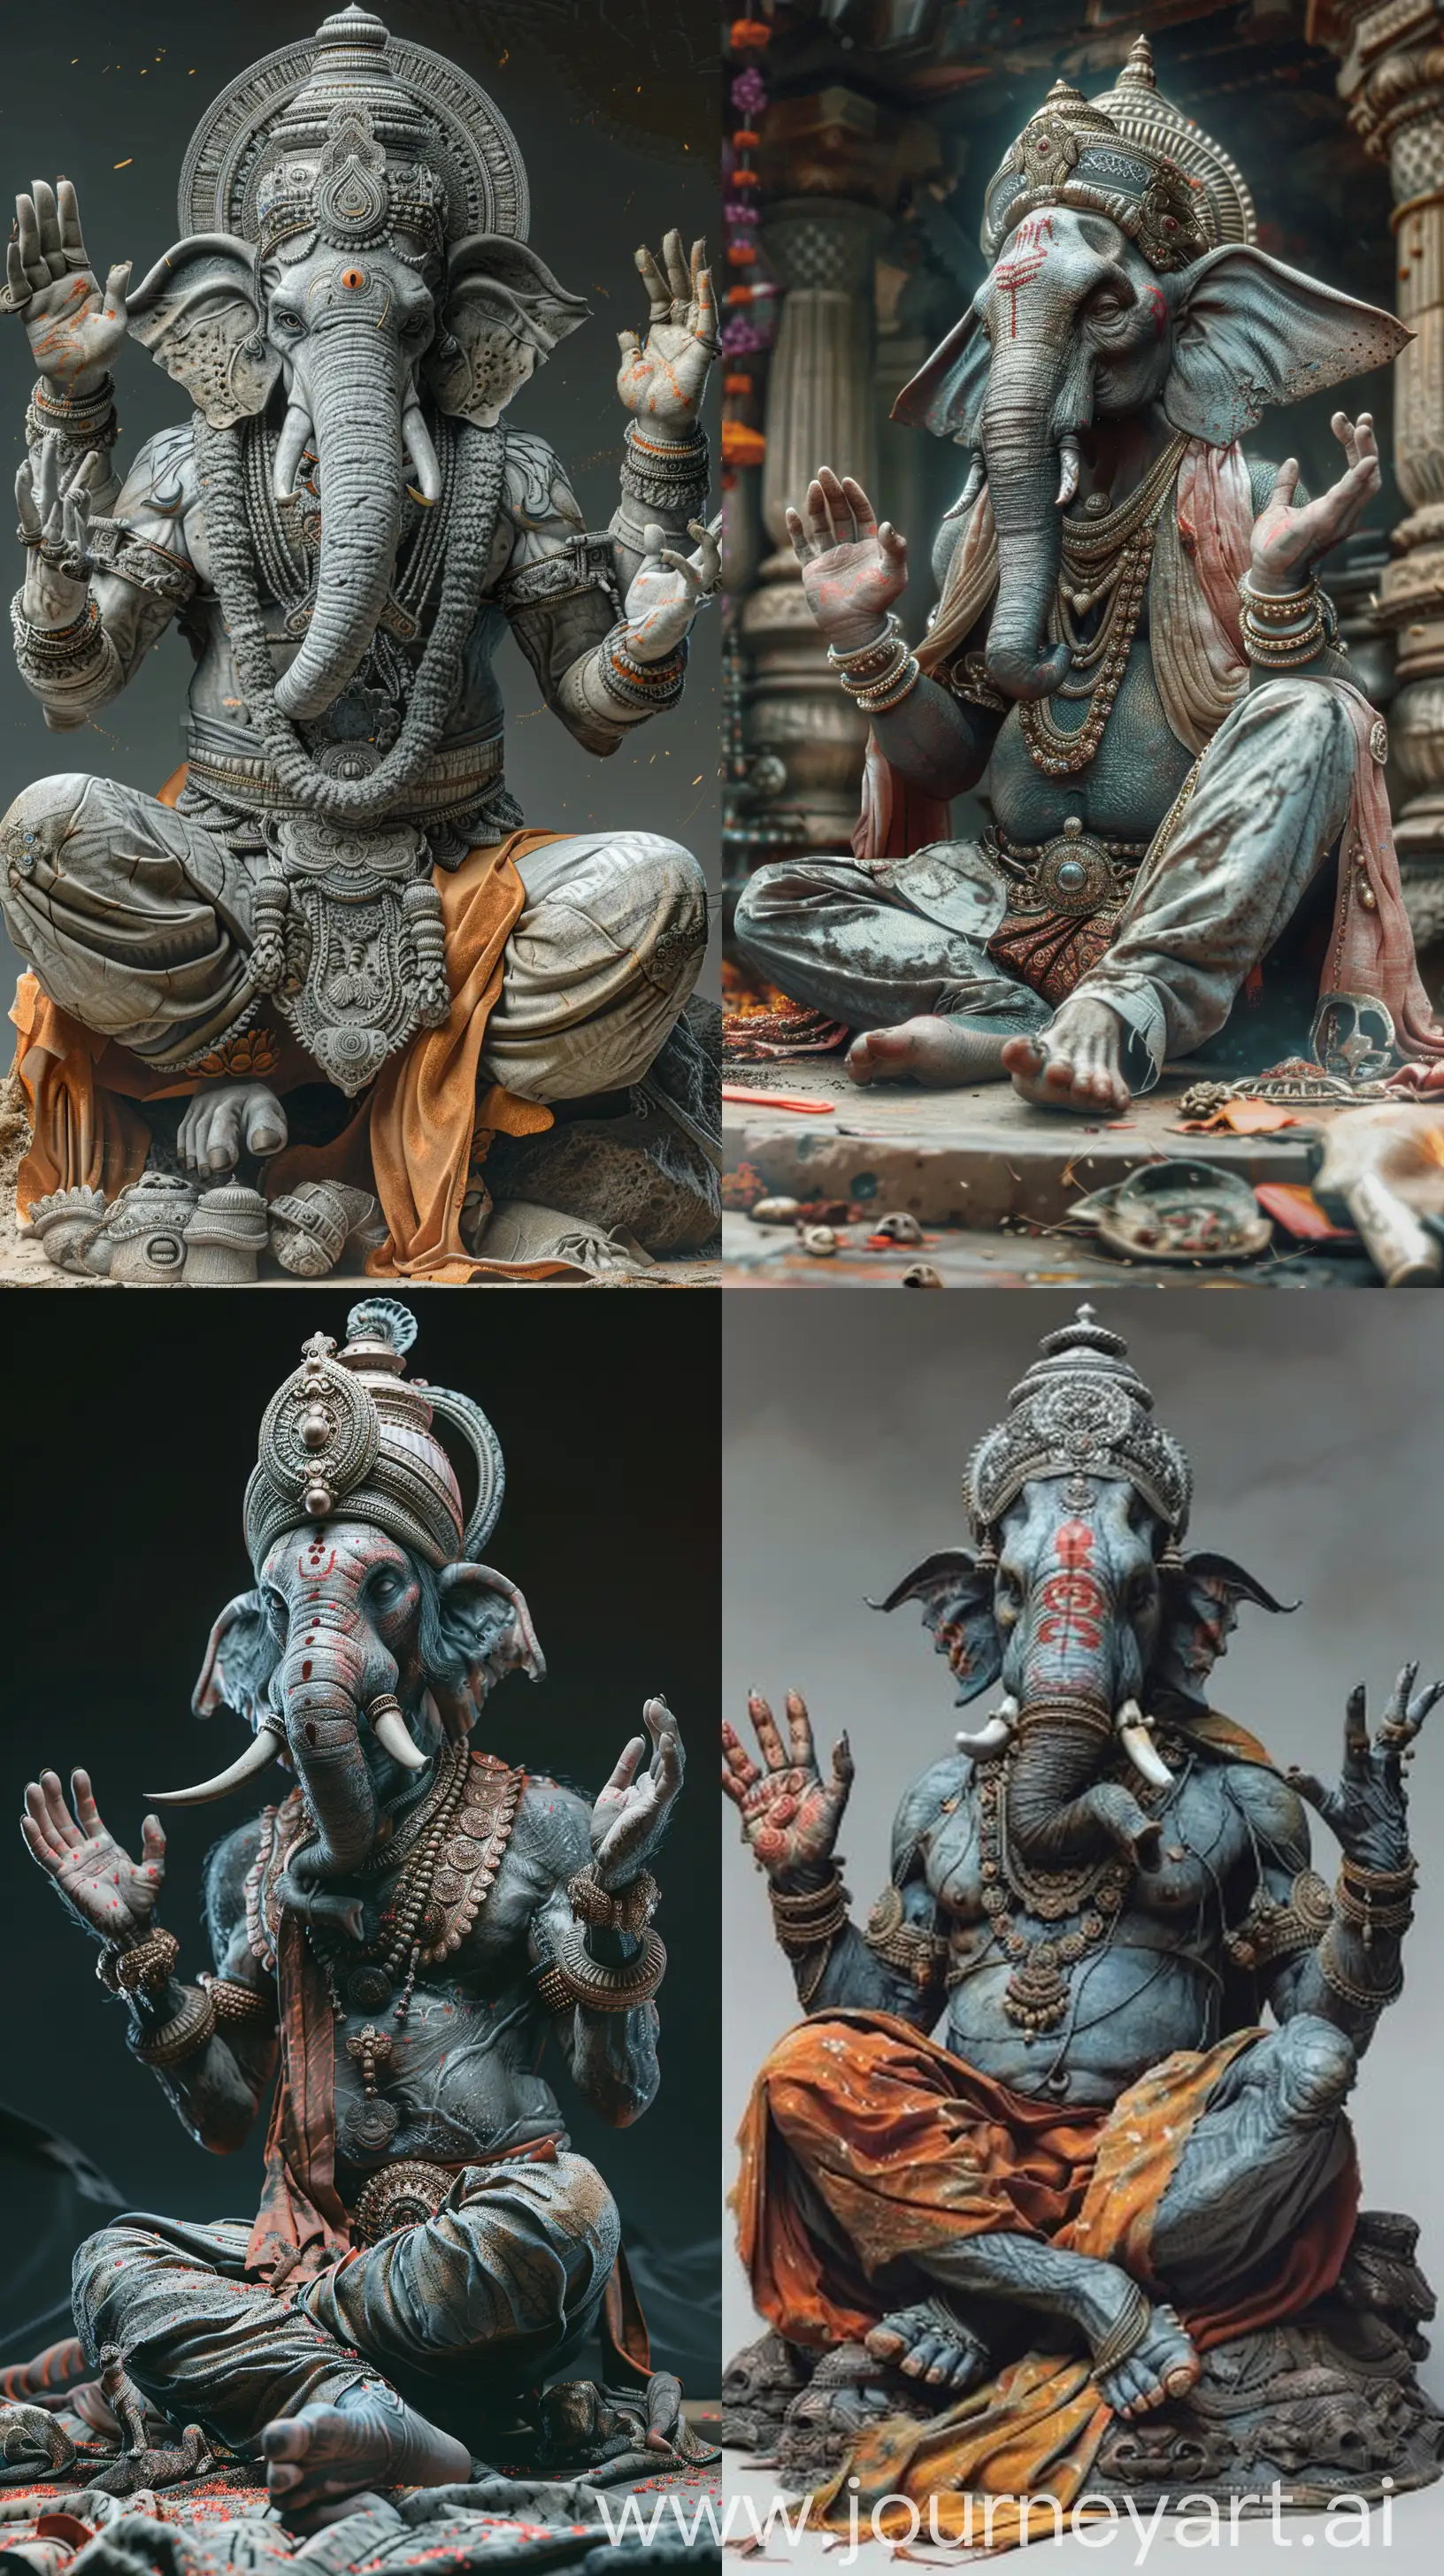 Hyper realistic image of an Indian demon with elephant head, seated on the ground, seen as if he's praising someone and talking, hand gestures, intricate details, high resolution image --s 200 --ar 9:16 --v 6